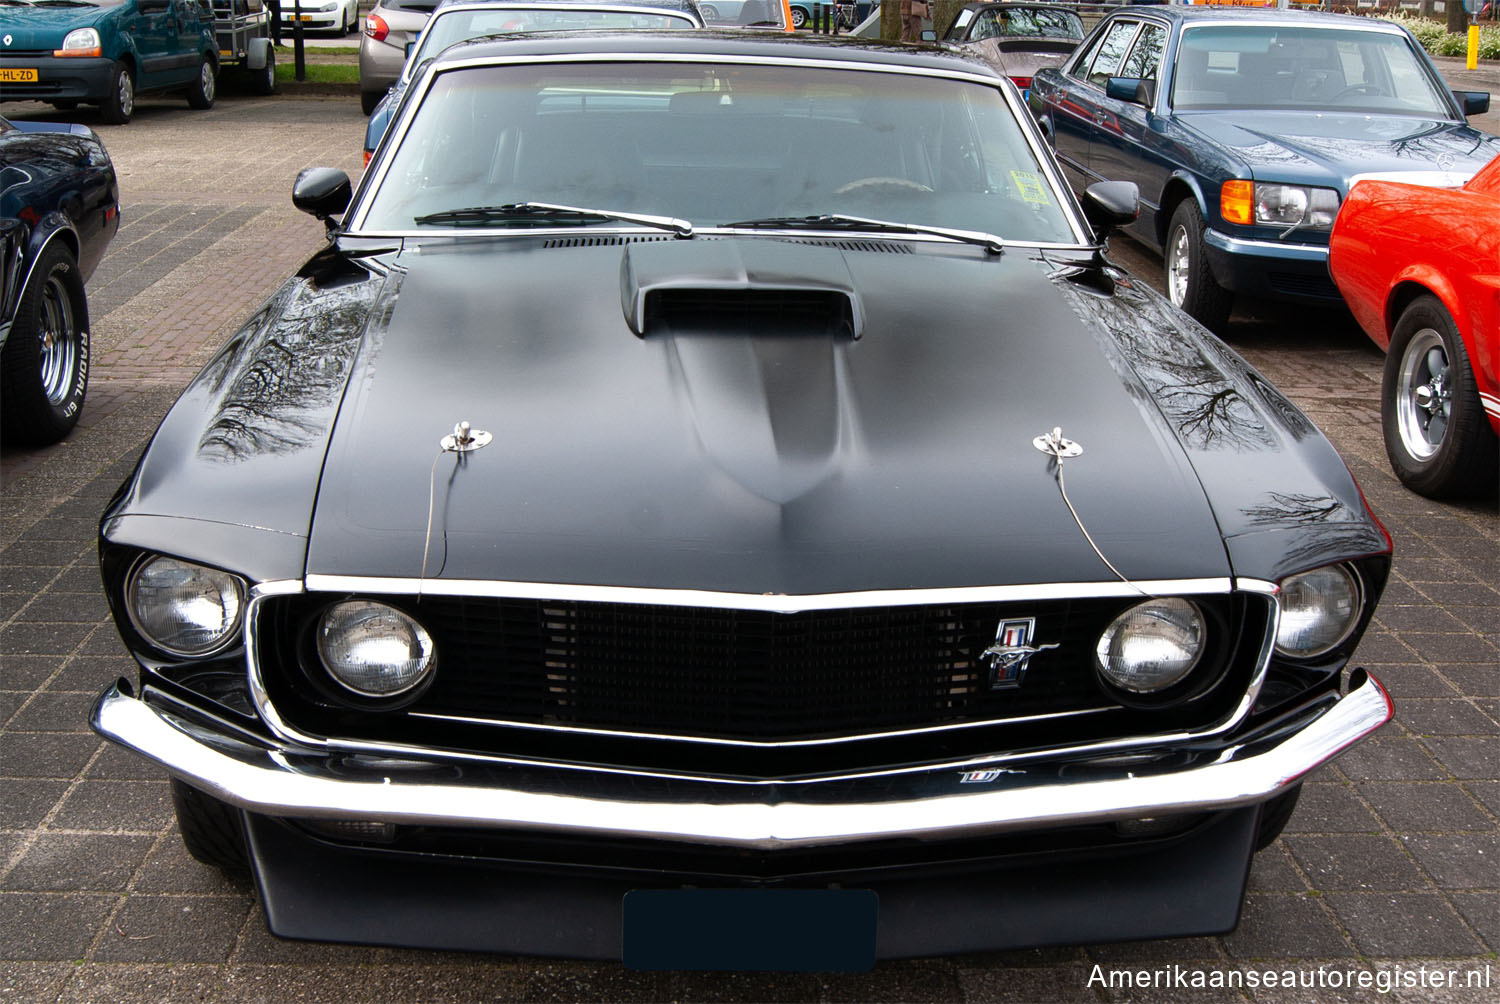 Ford Mustang uit 1969